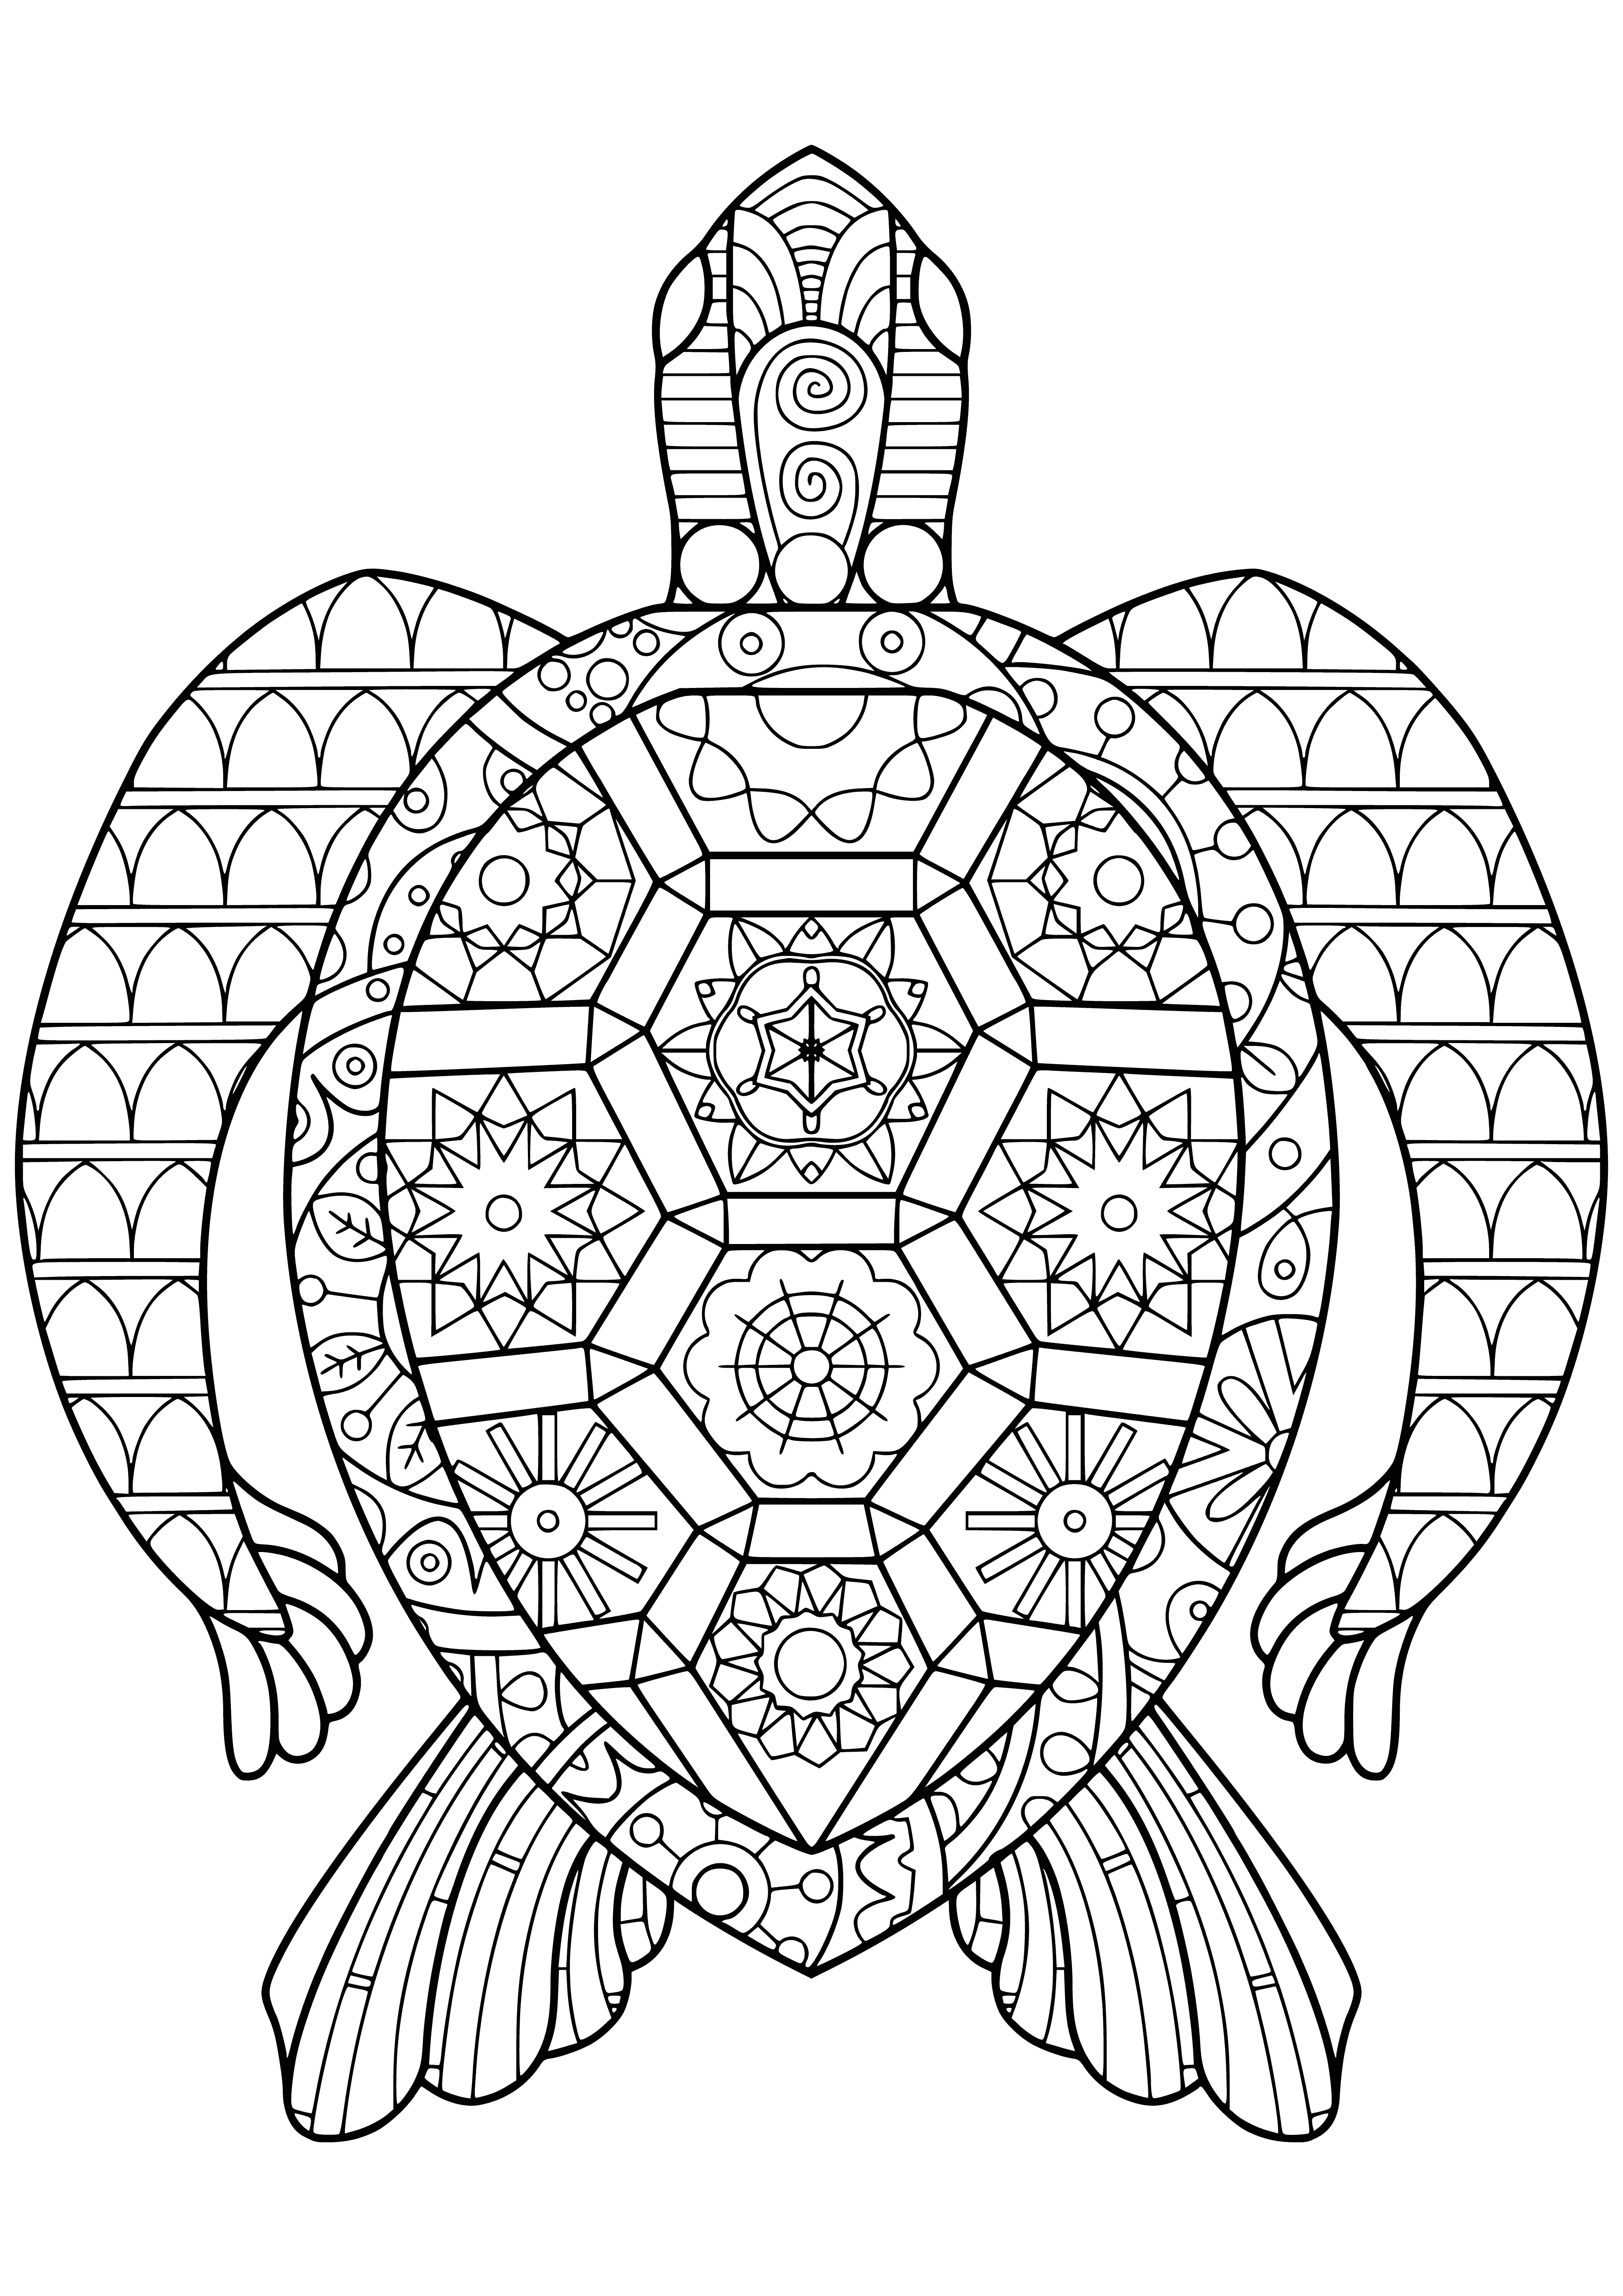 coloring page: The turtle soaks up the sun and the colors of the sea as it swims merrily.

A turtle swimming in a colorful sea, enjoying the sun and waves.